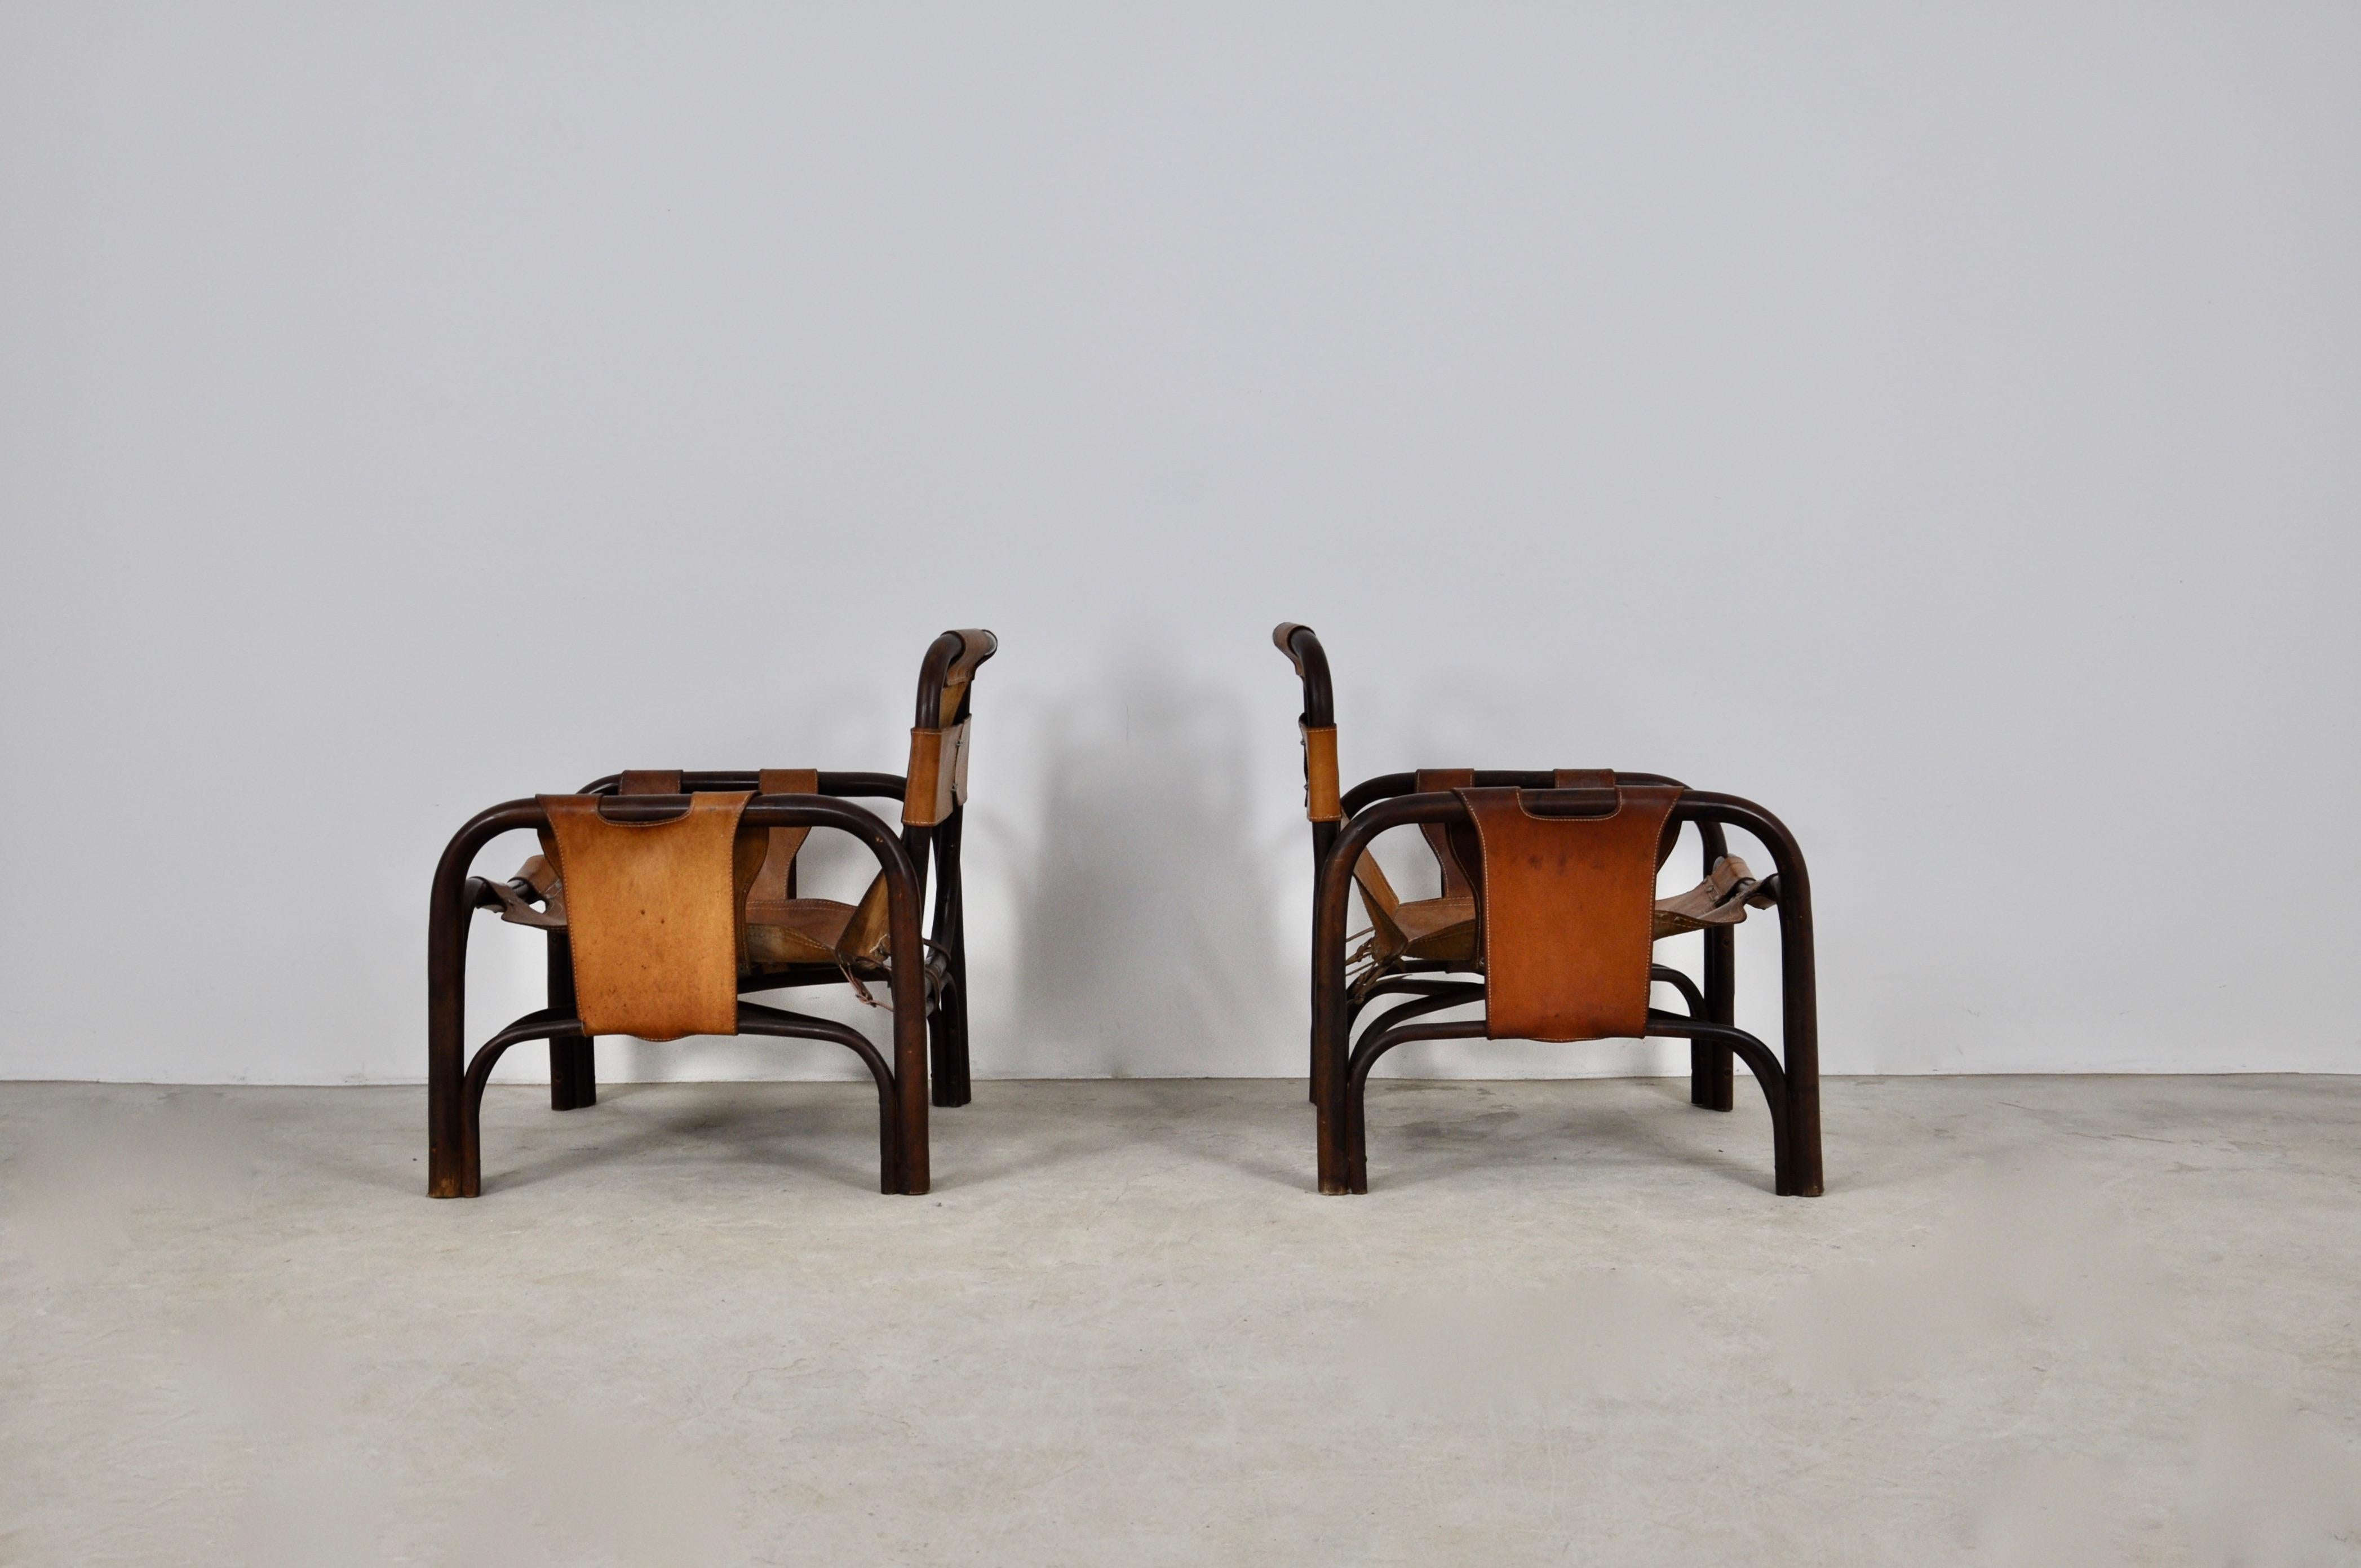 Pair of leather and bamboo armchairs. Wear due to time and age of the chairs. Measure: Seat height: 37cm.